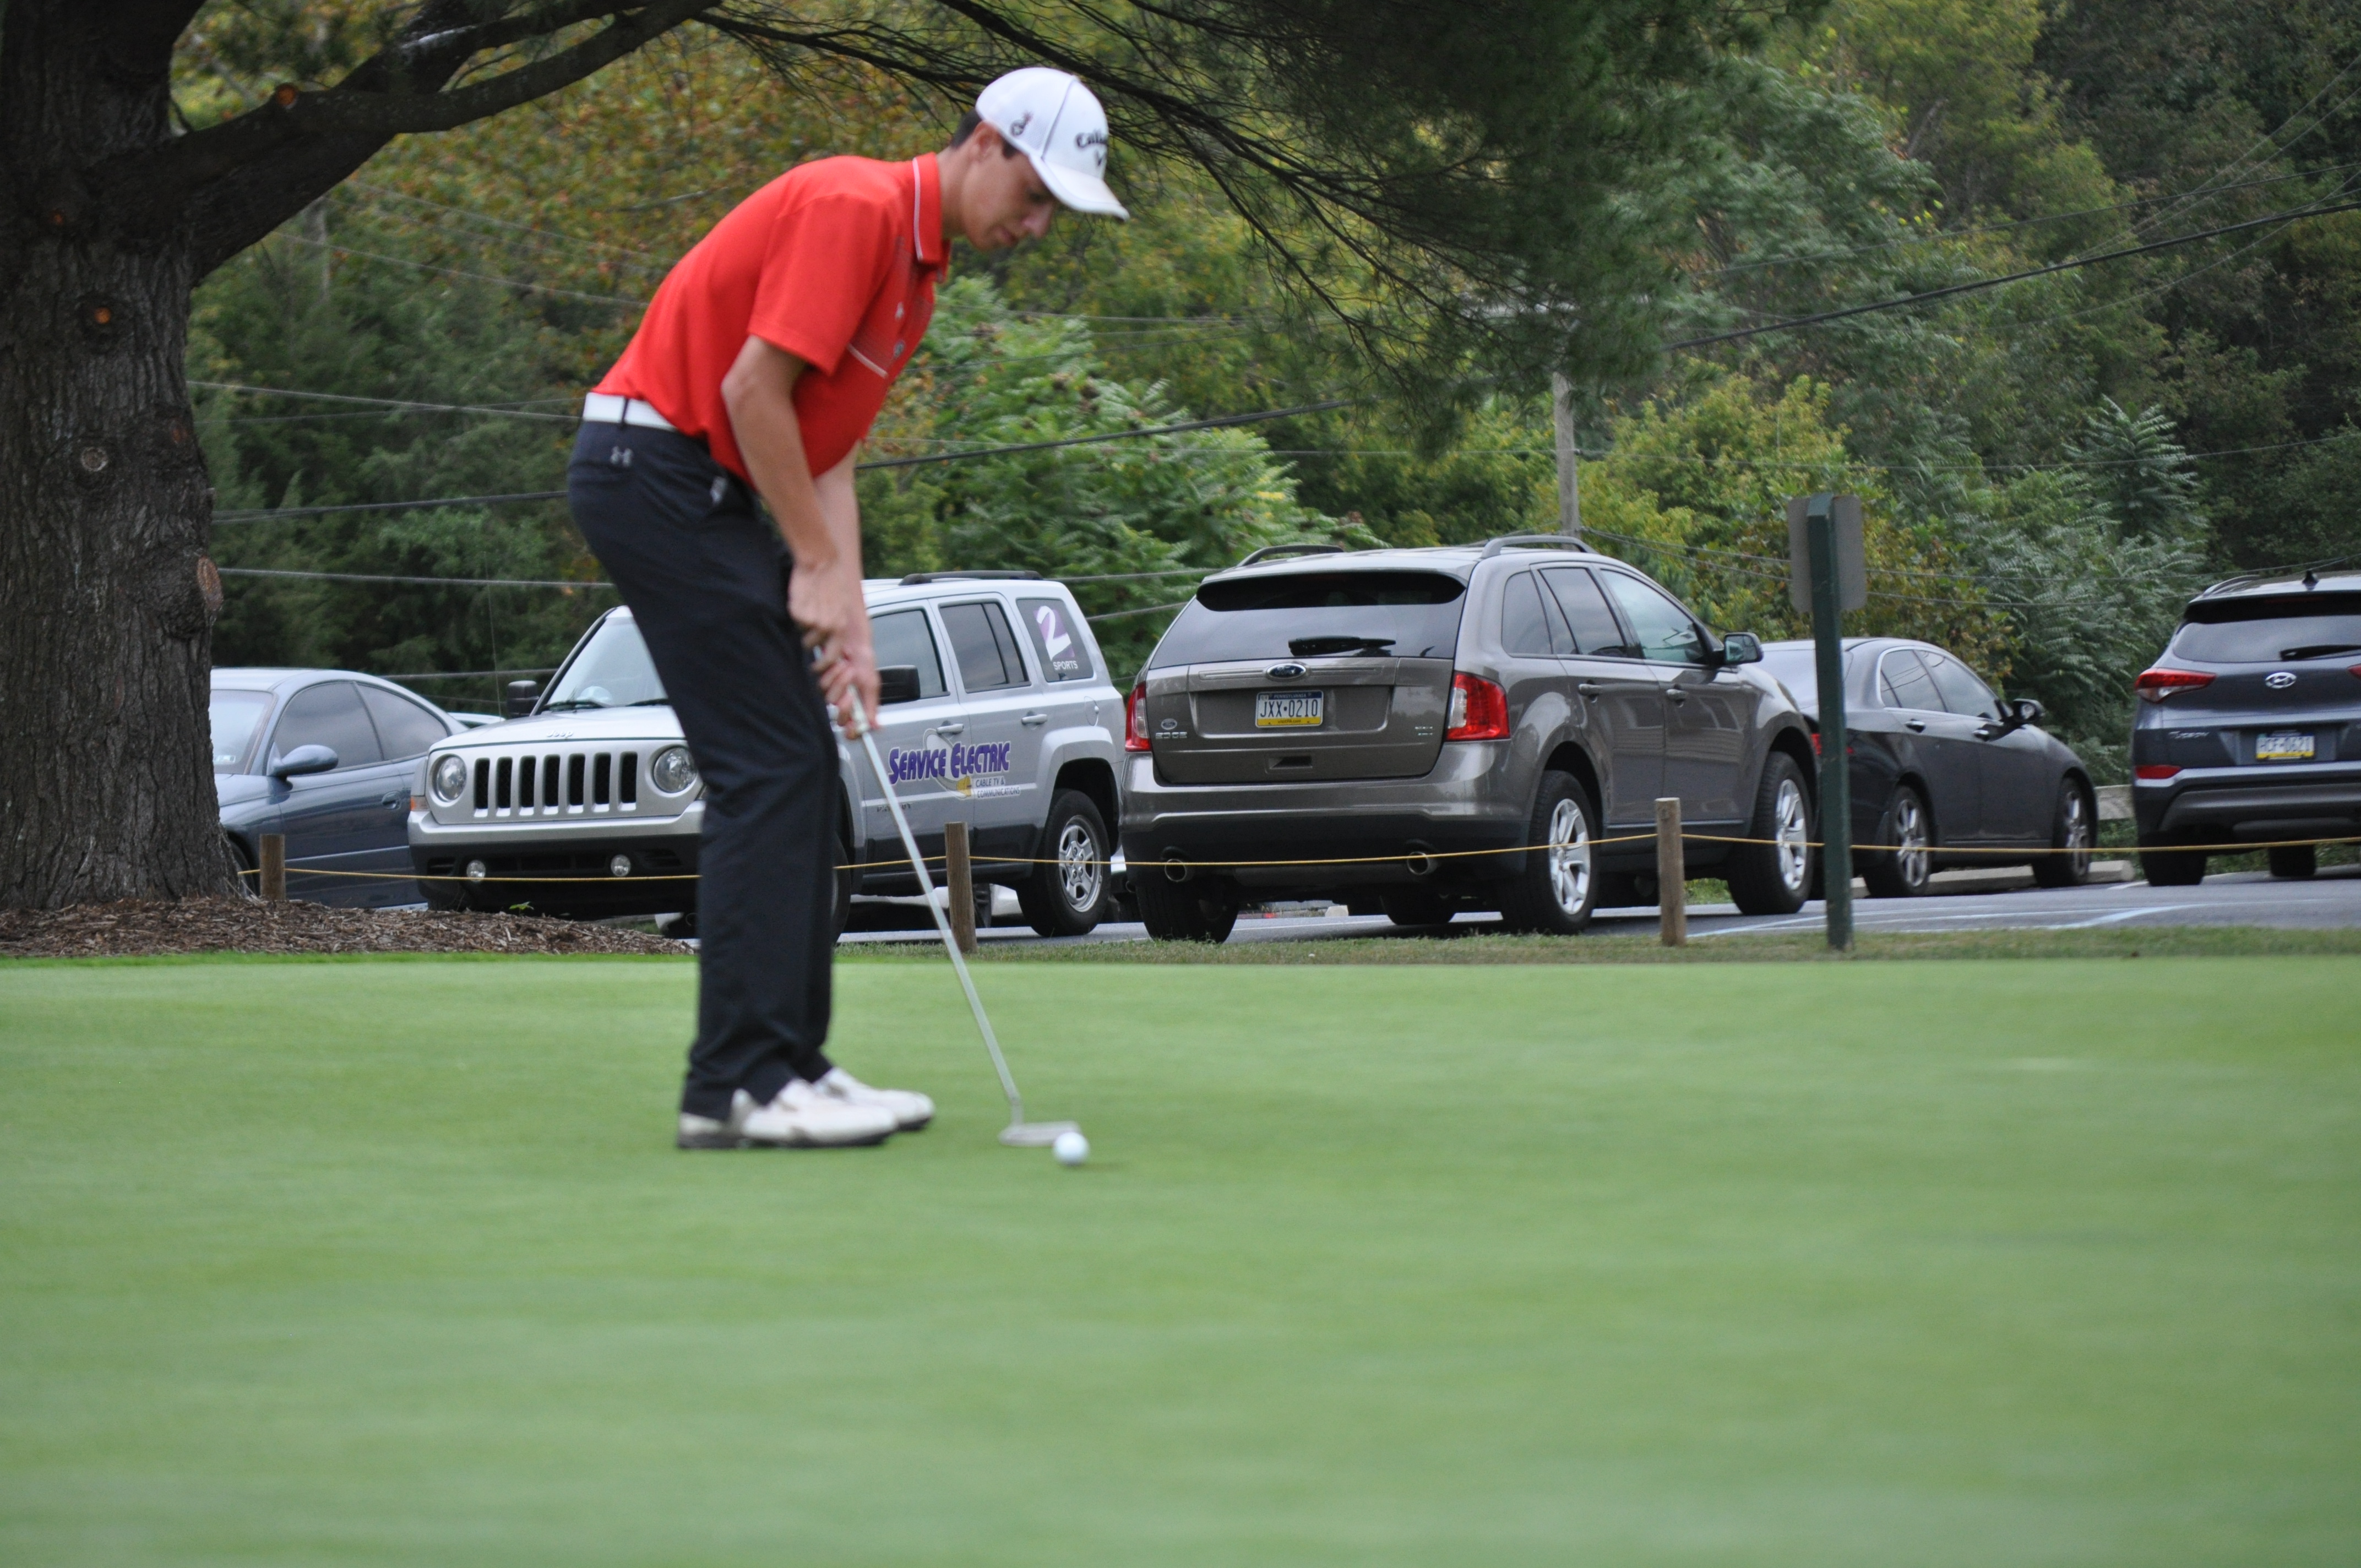 Saucon senior Thomas Coakley putting on the 18th hole at the Bethlehem Golf Club in the Colonial League championship.